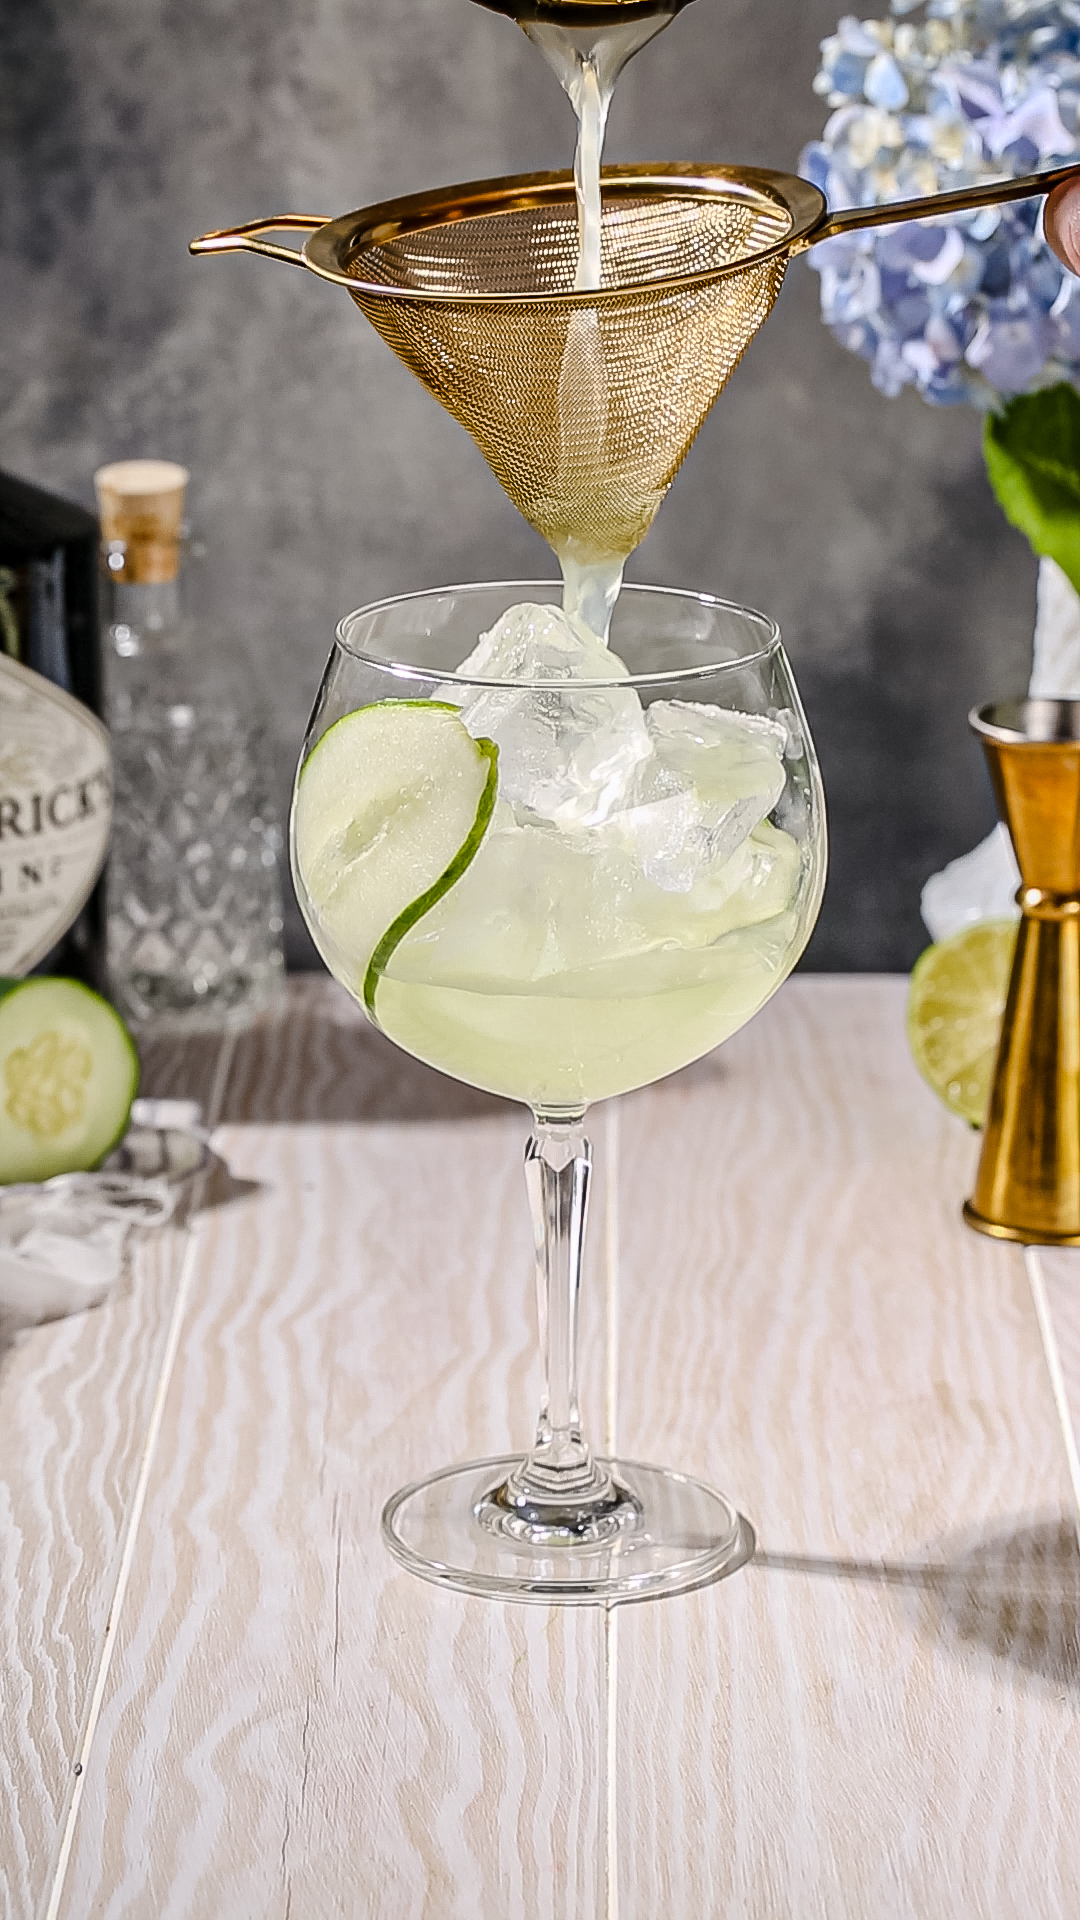 A light green liquid being poured through a gold colored fine mesh strainer into an ice filled glass that also has a cucumber slice in it.